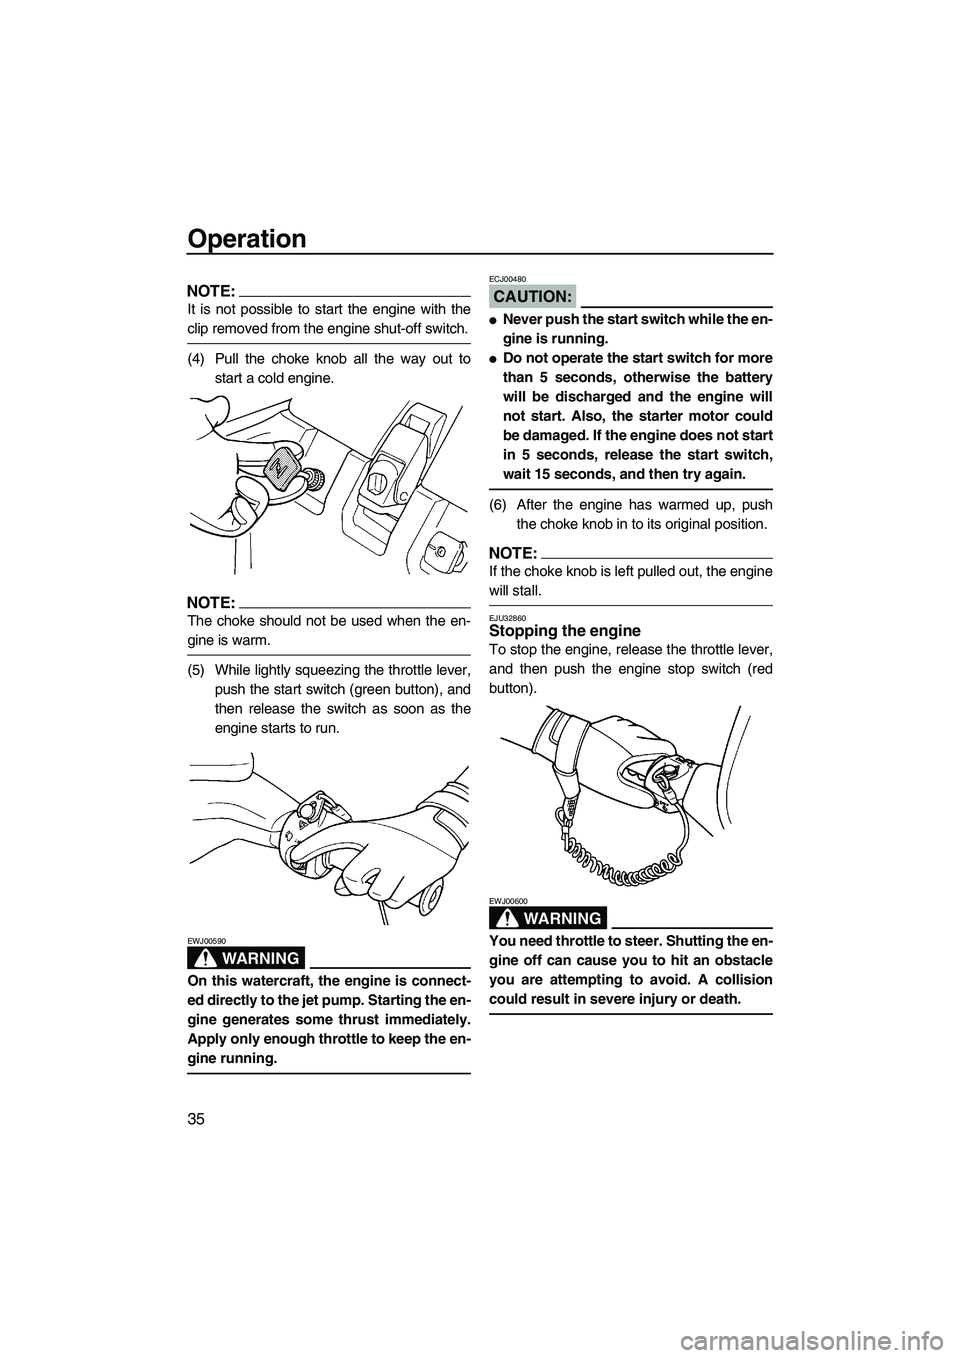 YAMAHA SUPERJET 2007  Owners Manual Operation
35
NOTE:
It is not possible to start the engine with the
clip removed from the engine shut-off switch.
(4) Pull the choke knob all the way out to
start a cold engine.
NOTE:
The choke should 